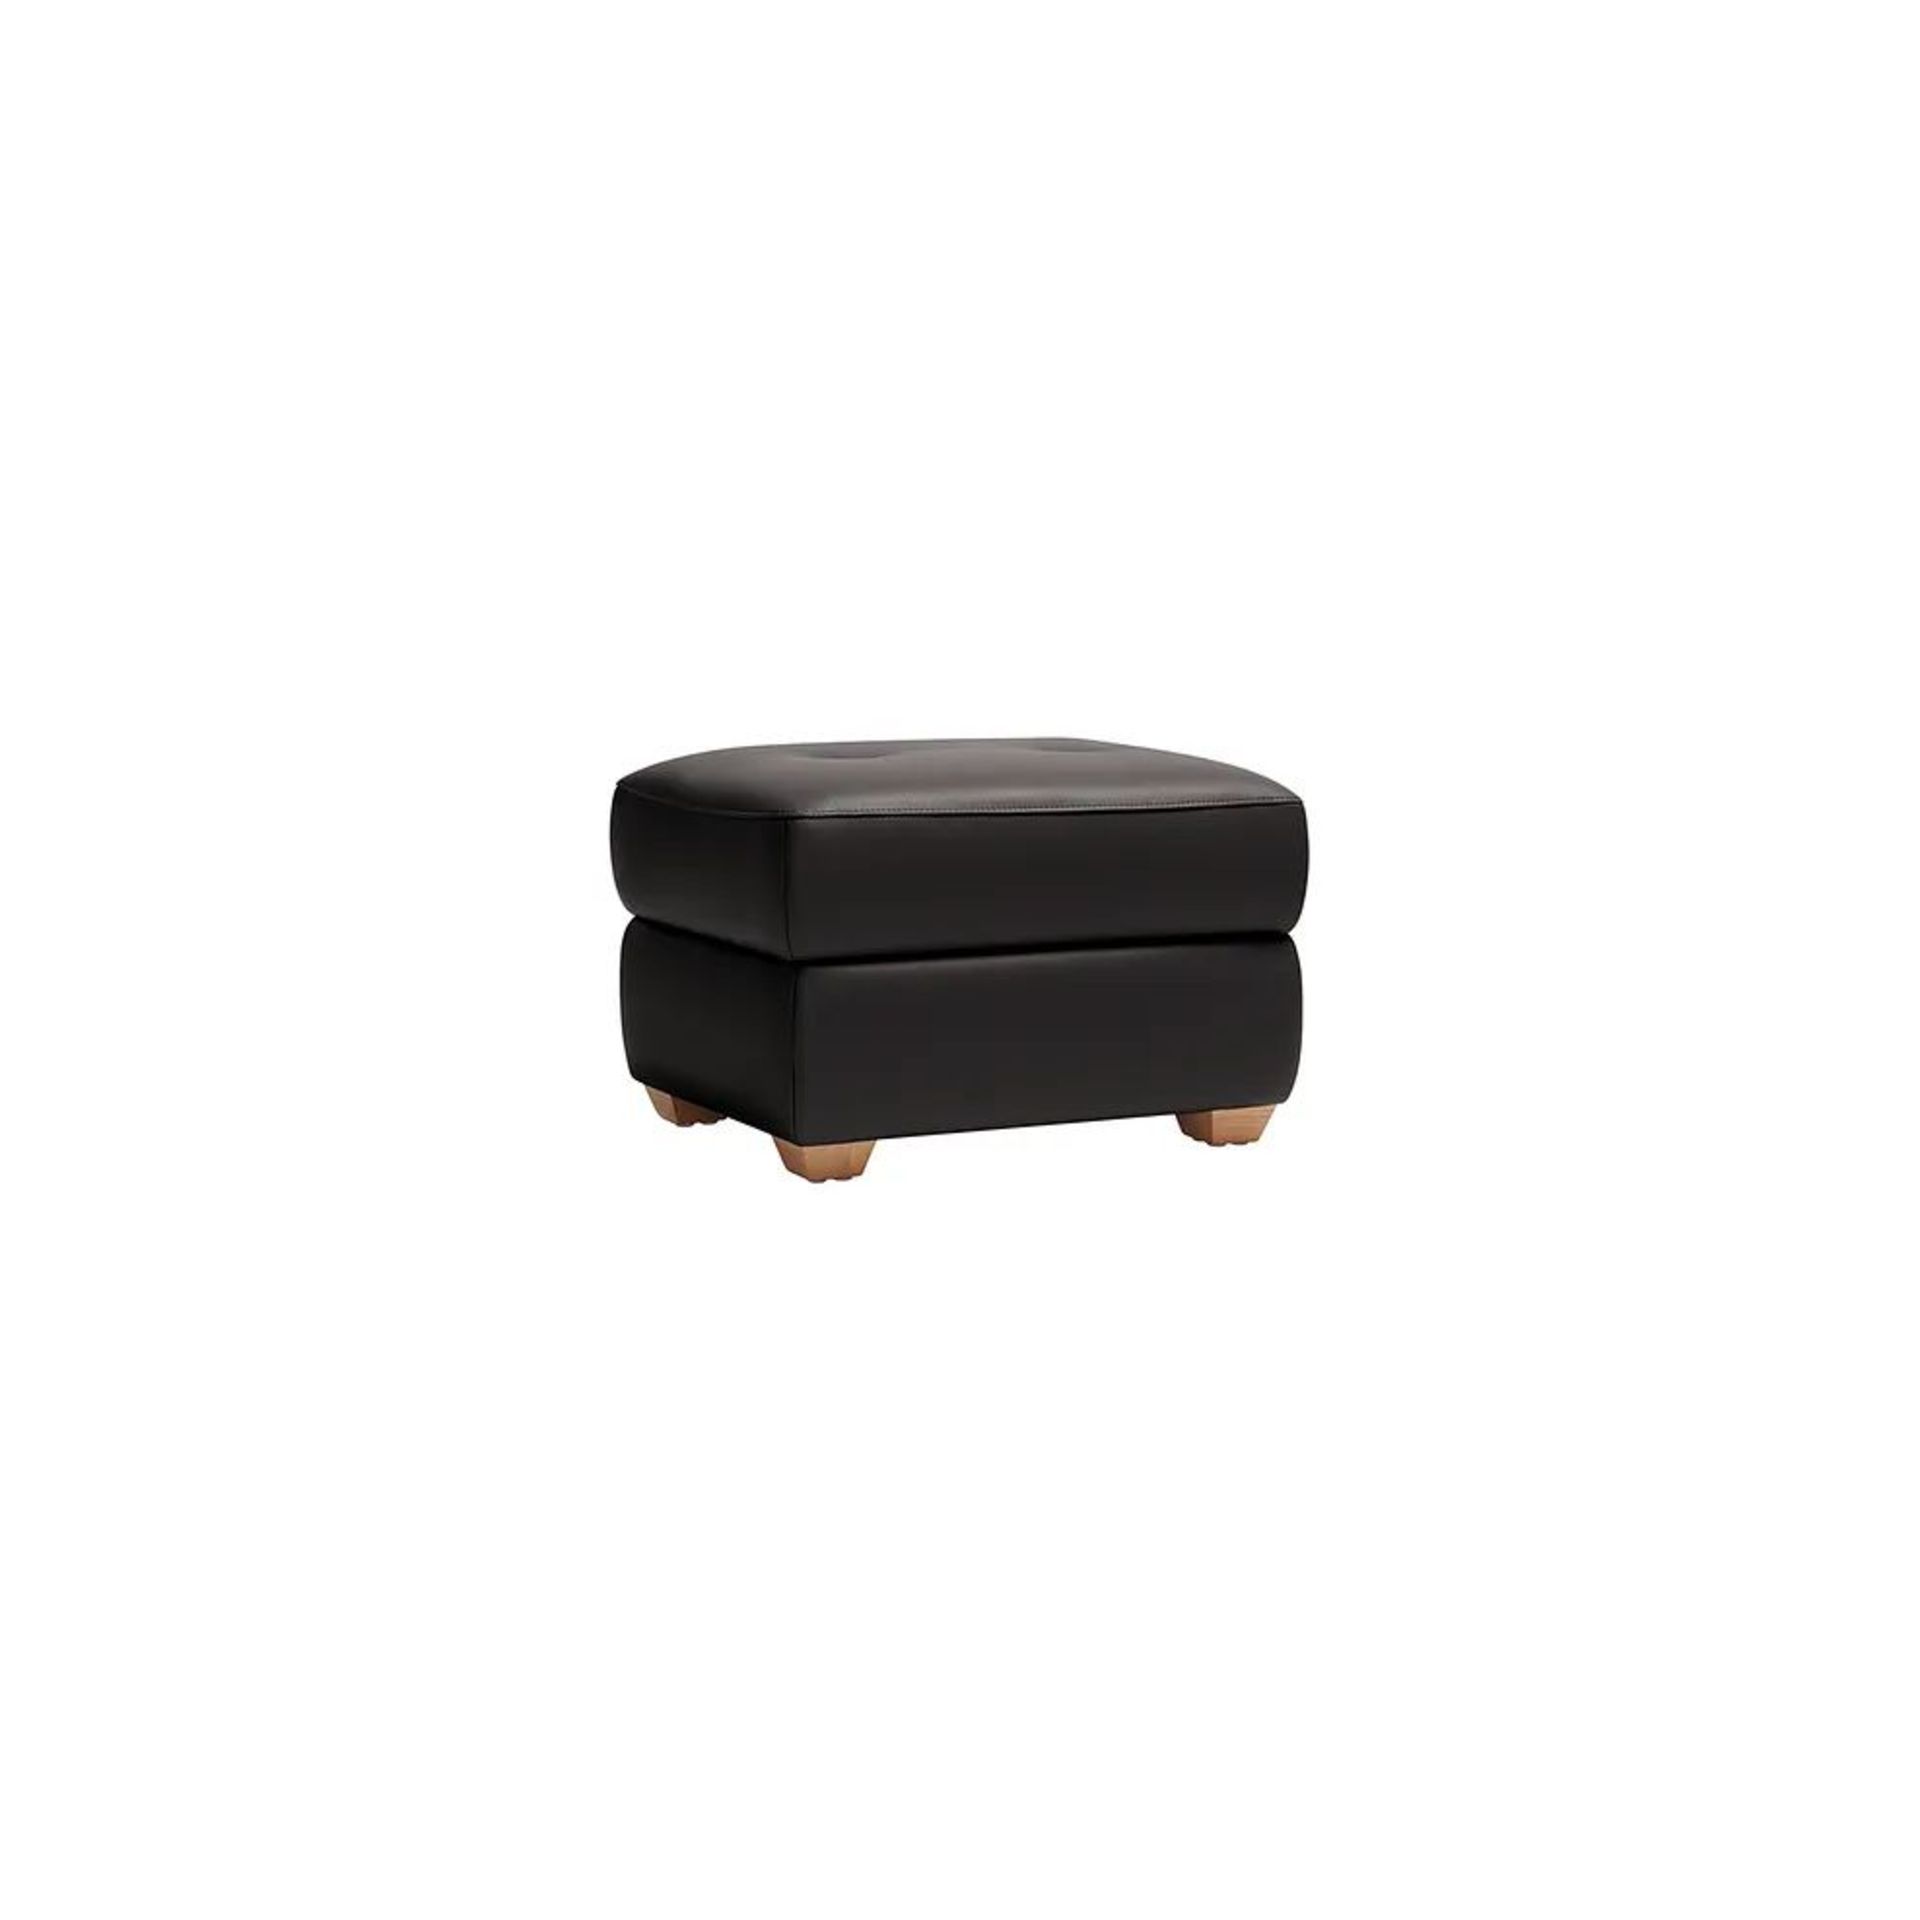 BRAND NEW SAMSON Storage Footstool - BLACK LEATHER. RRP £349. Characterised by a simple cuboid